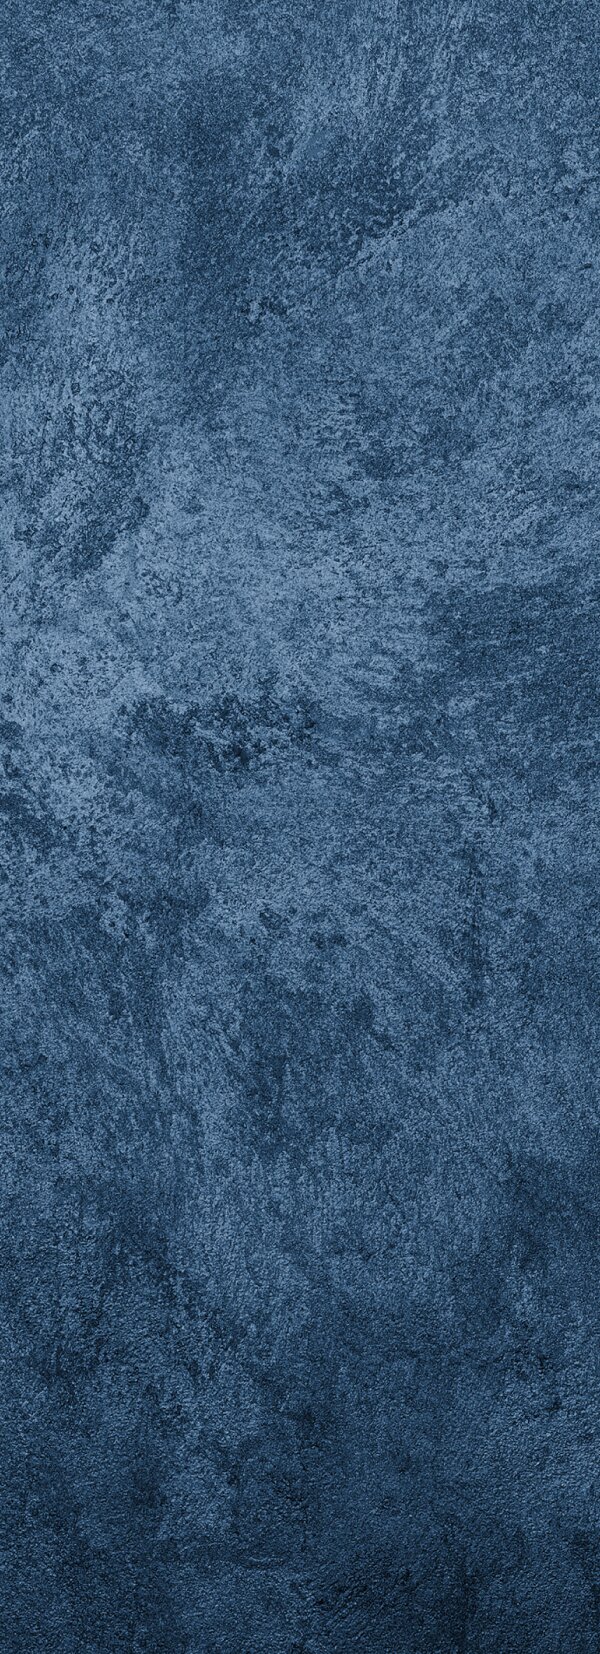 Blue Marble Background